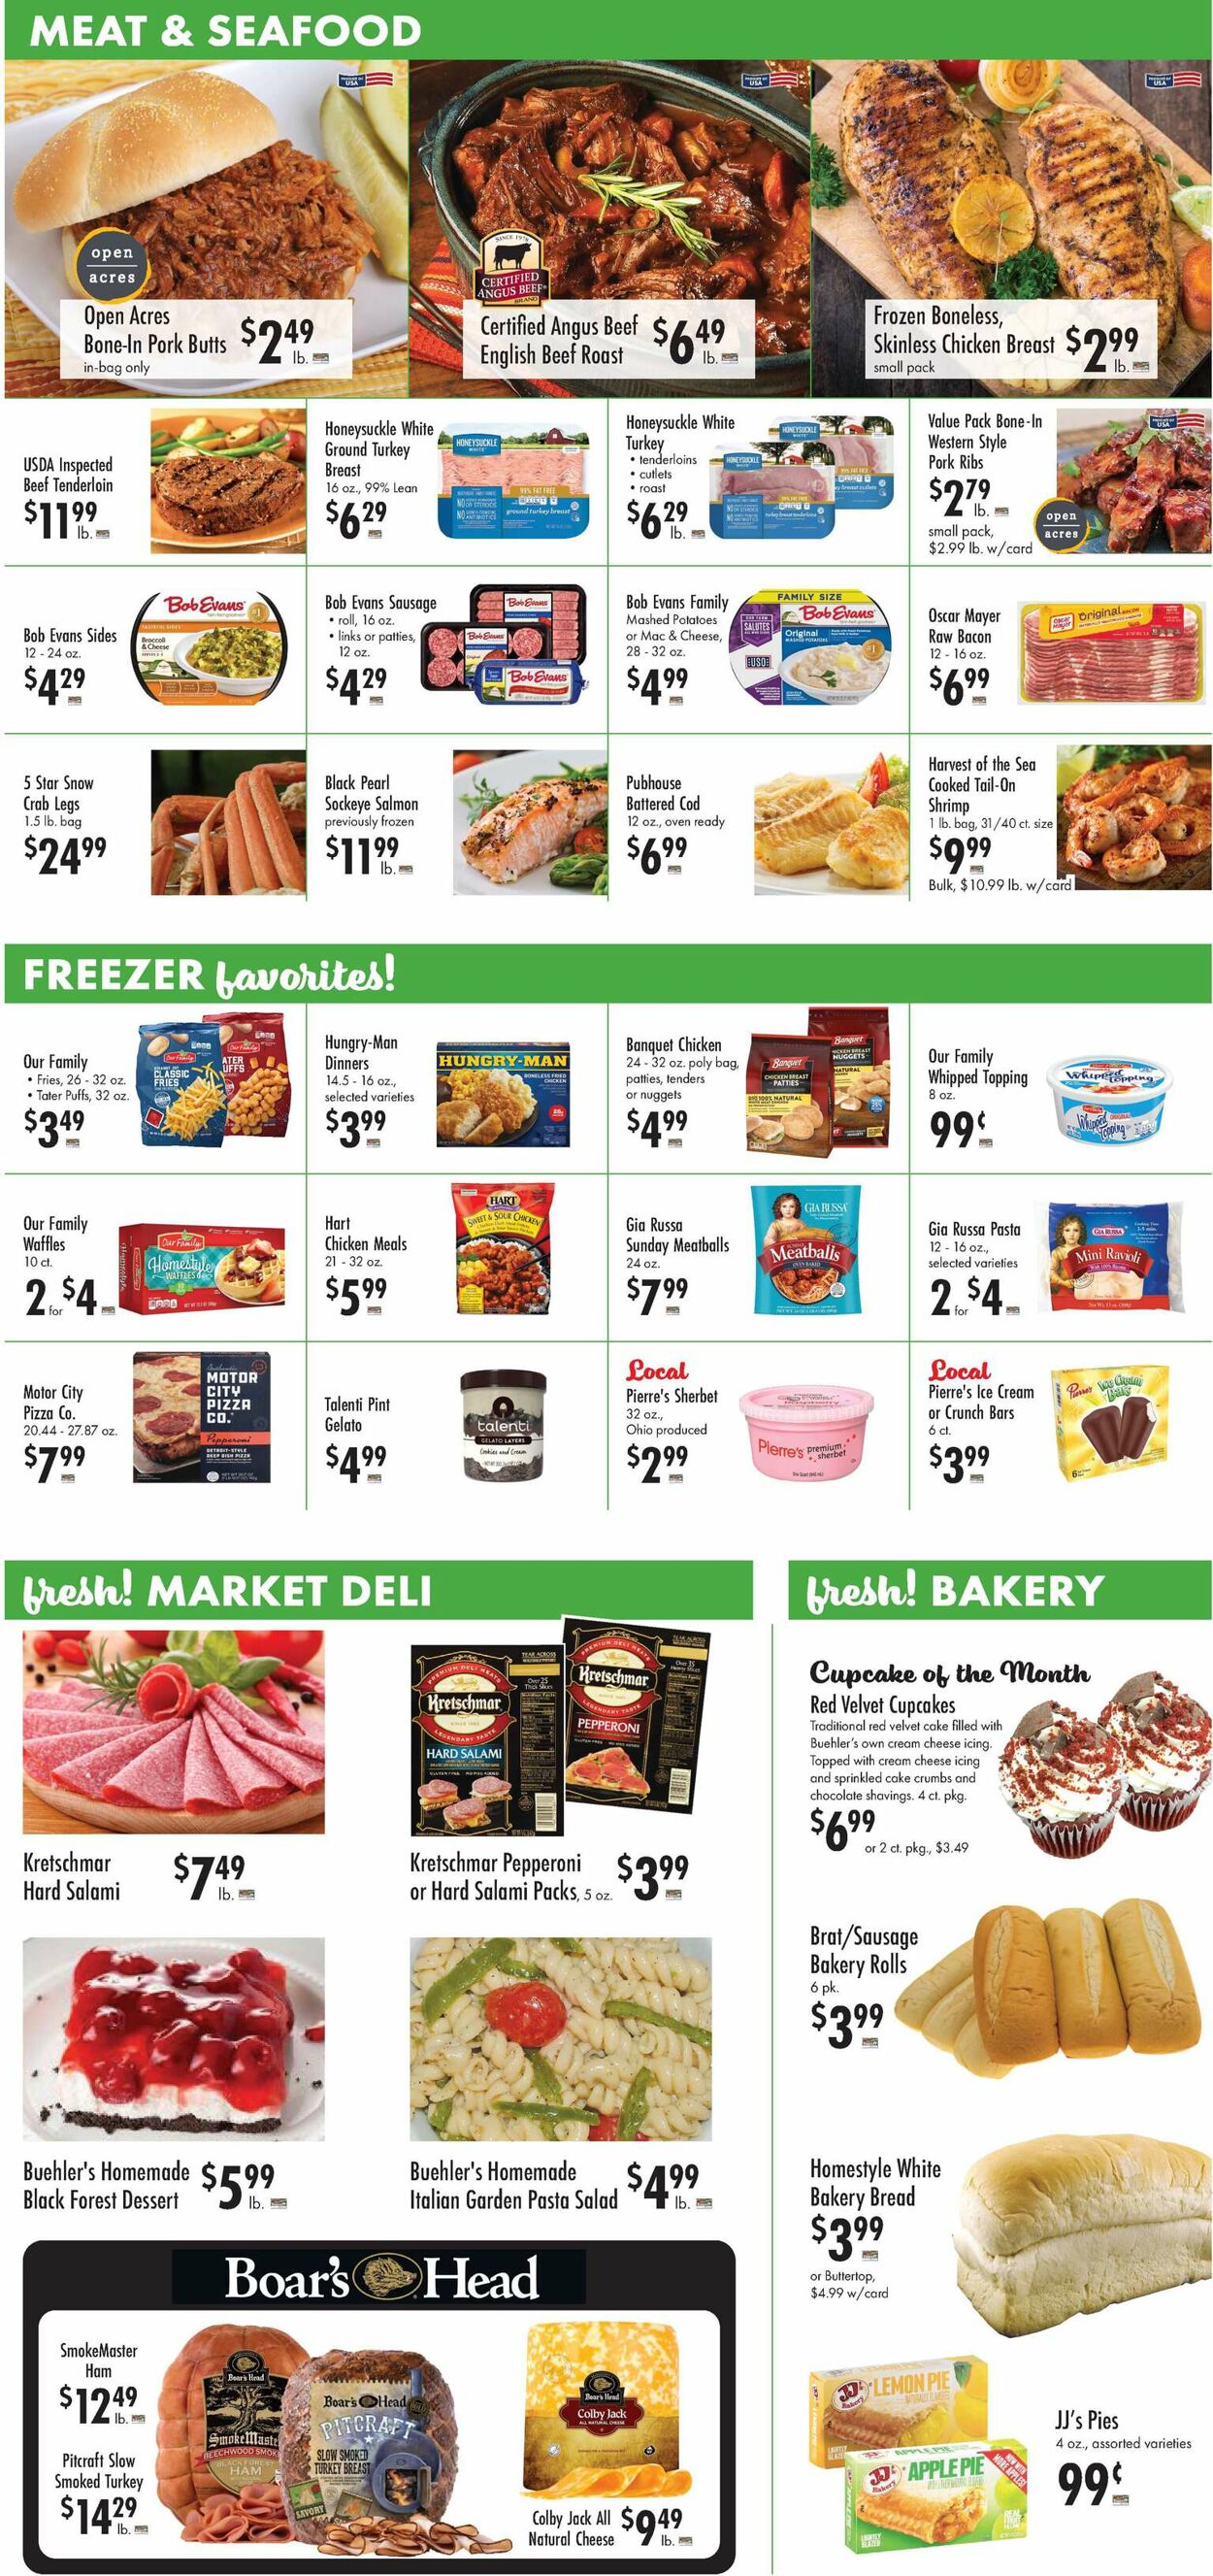 Catalogue Buehler's Fresh Foods from 10/04/2023